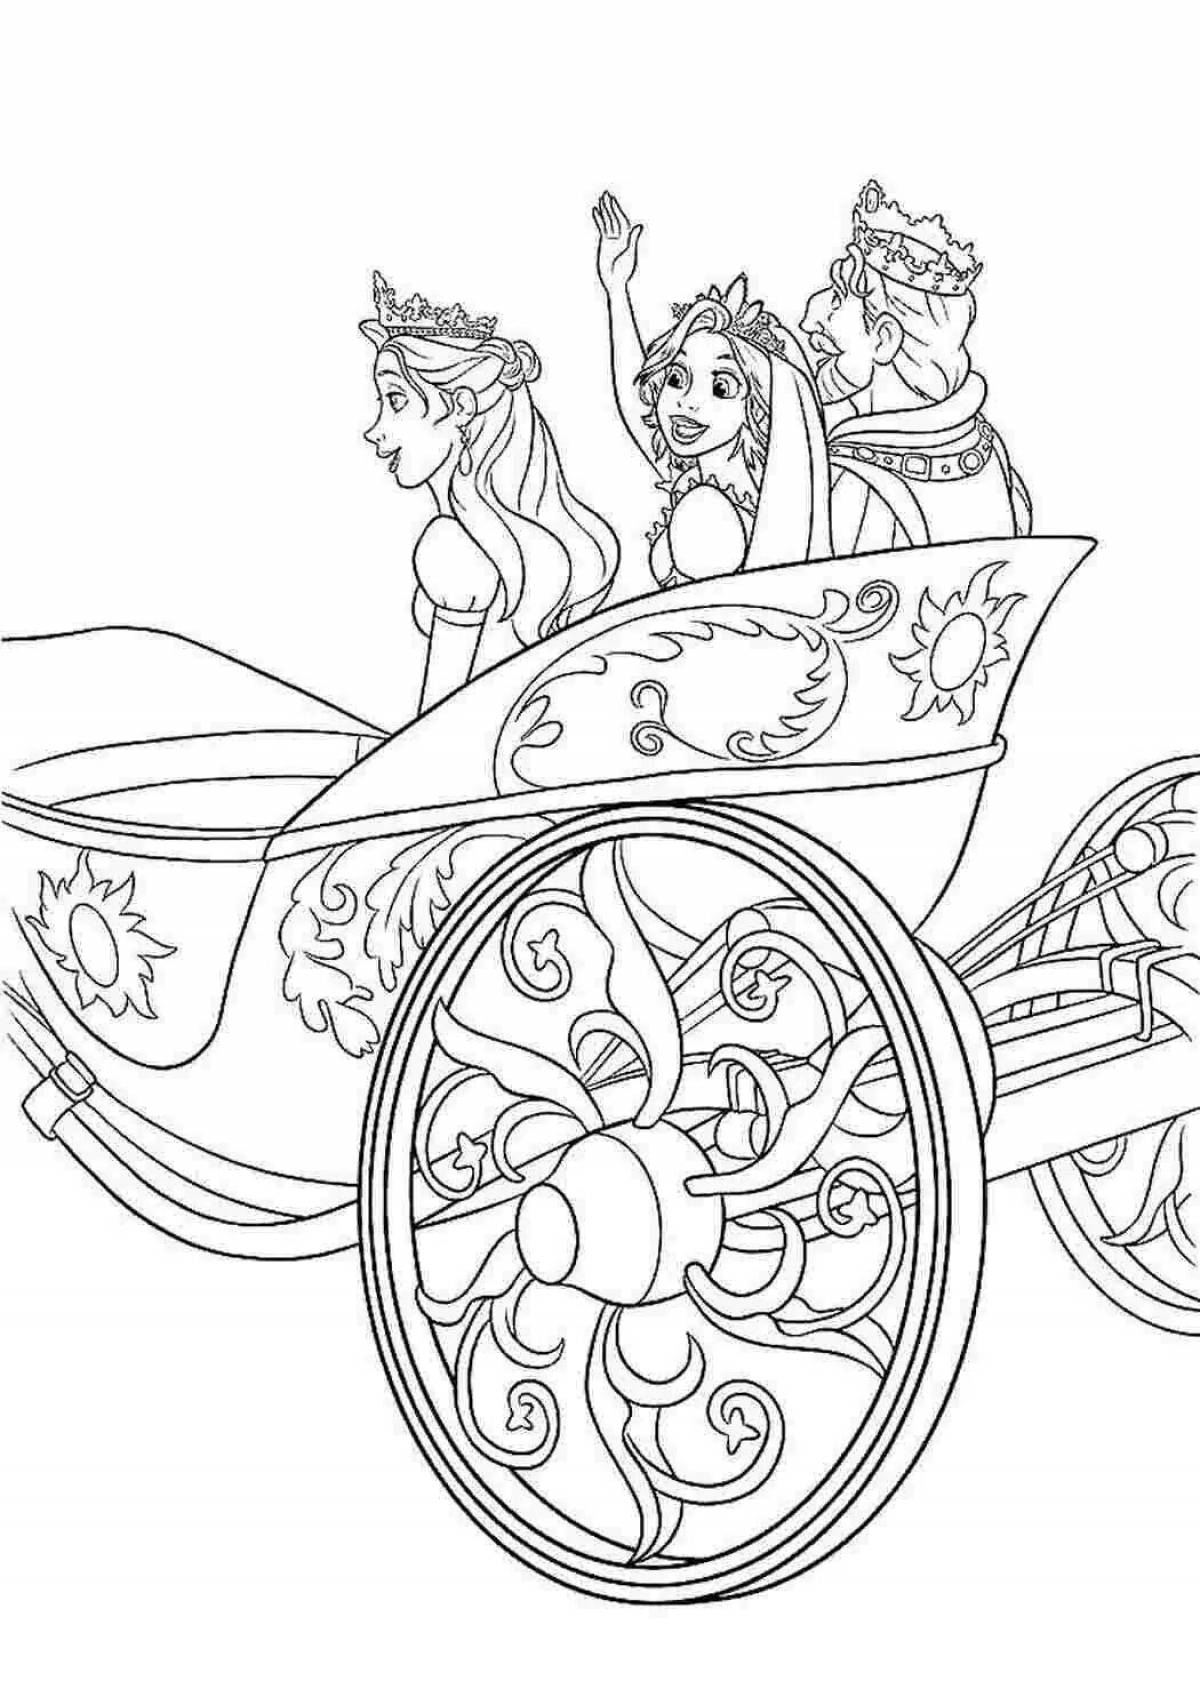 Coloring page majestic princess in carriage